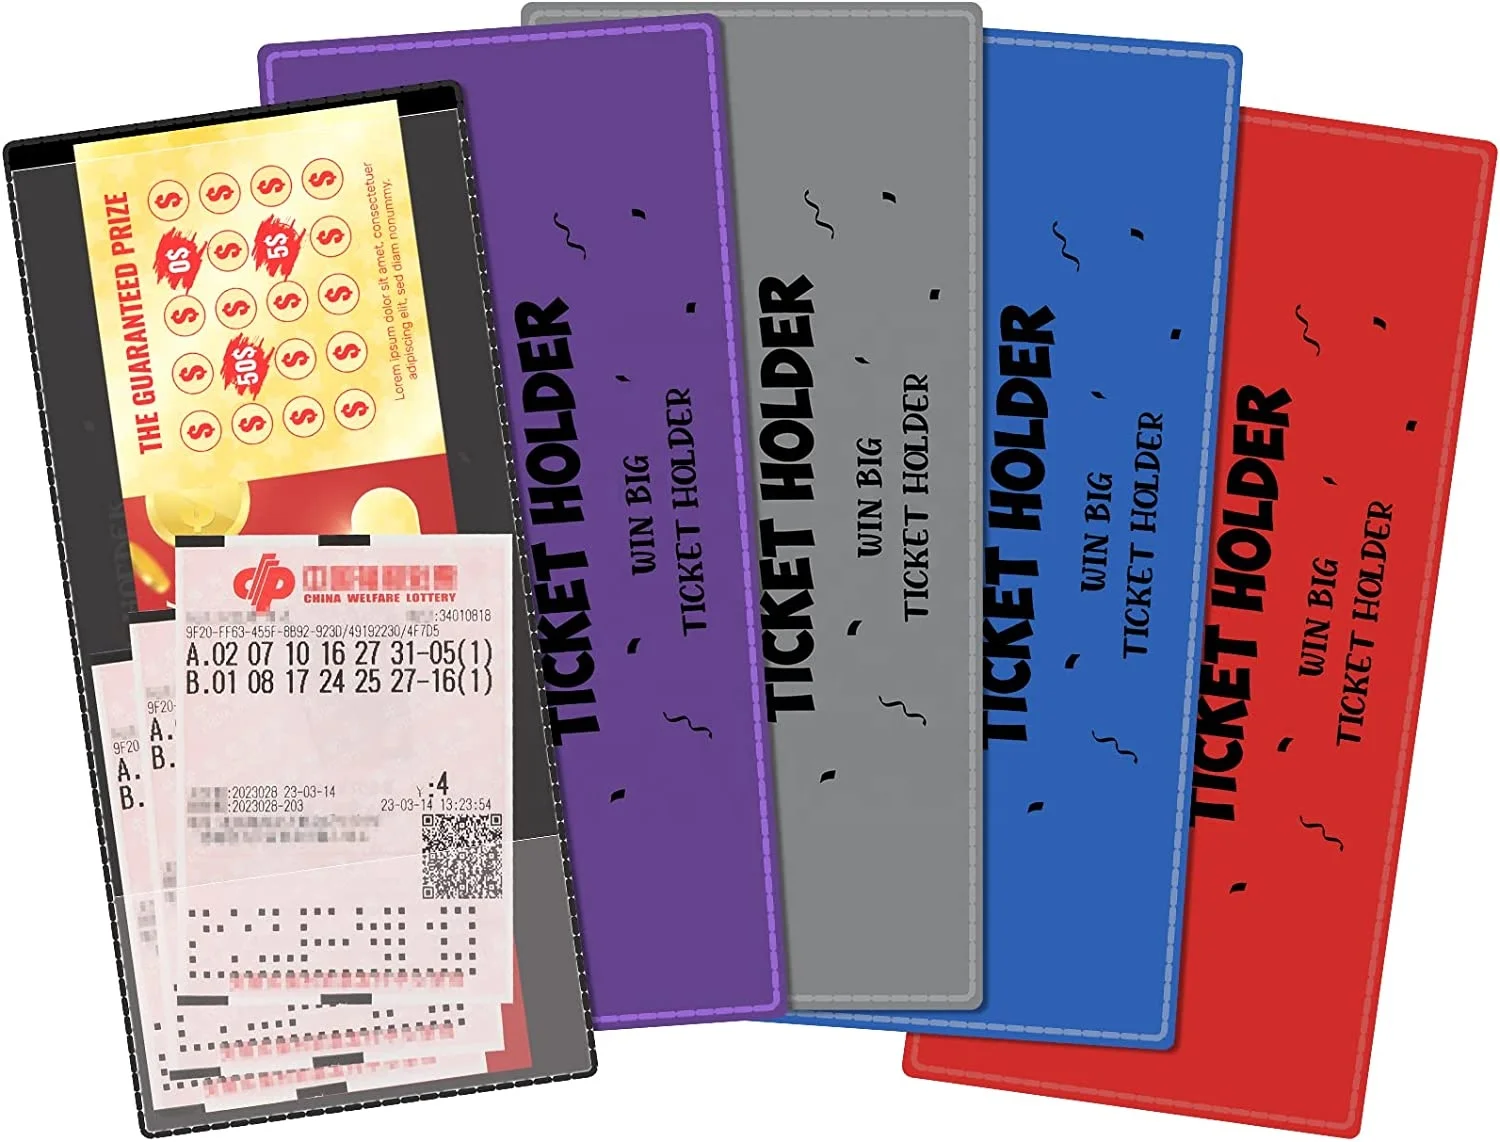 10 pieces pvc lotto ticket holders